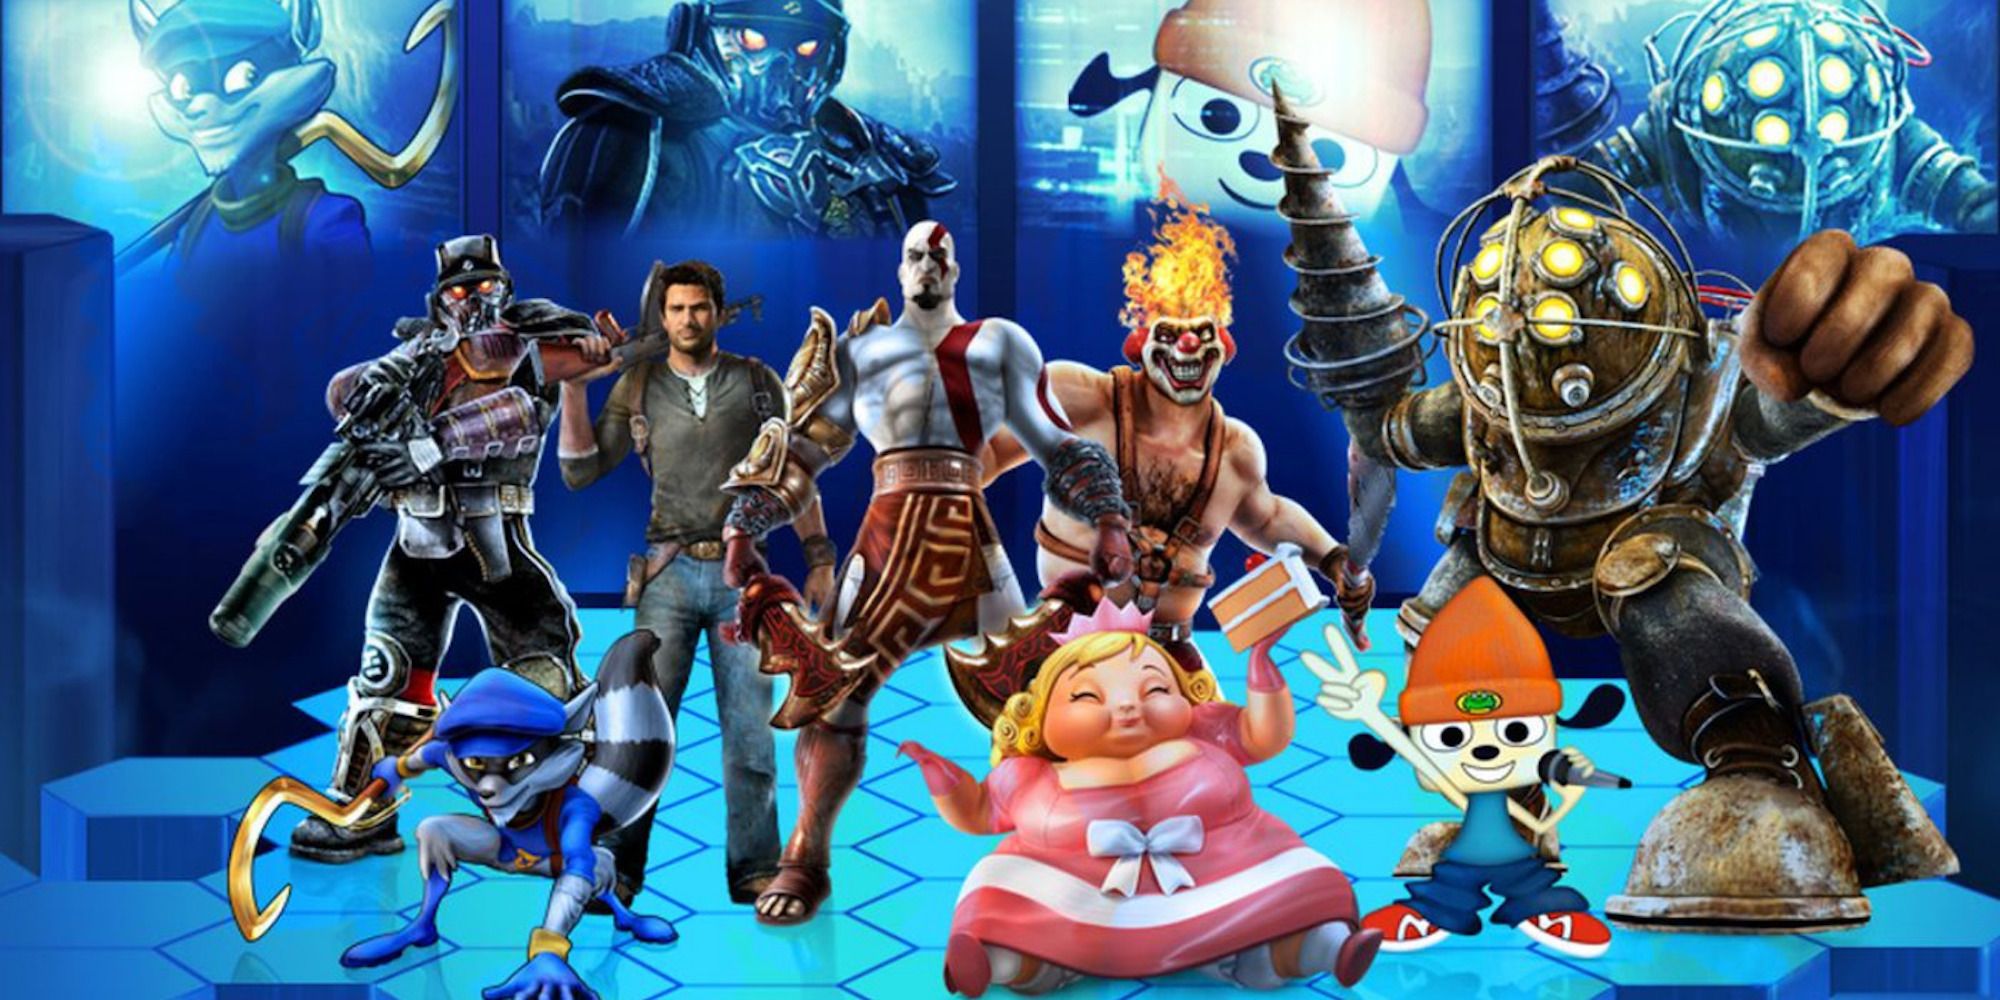 Promo art featuring characters from PlayStation All-Stars Battle Royale